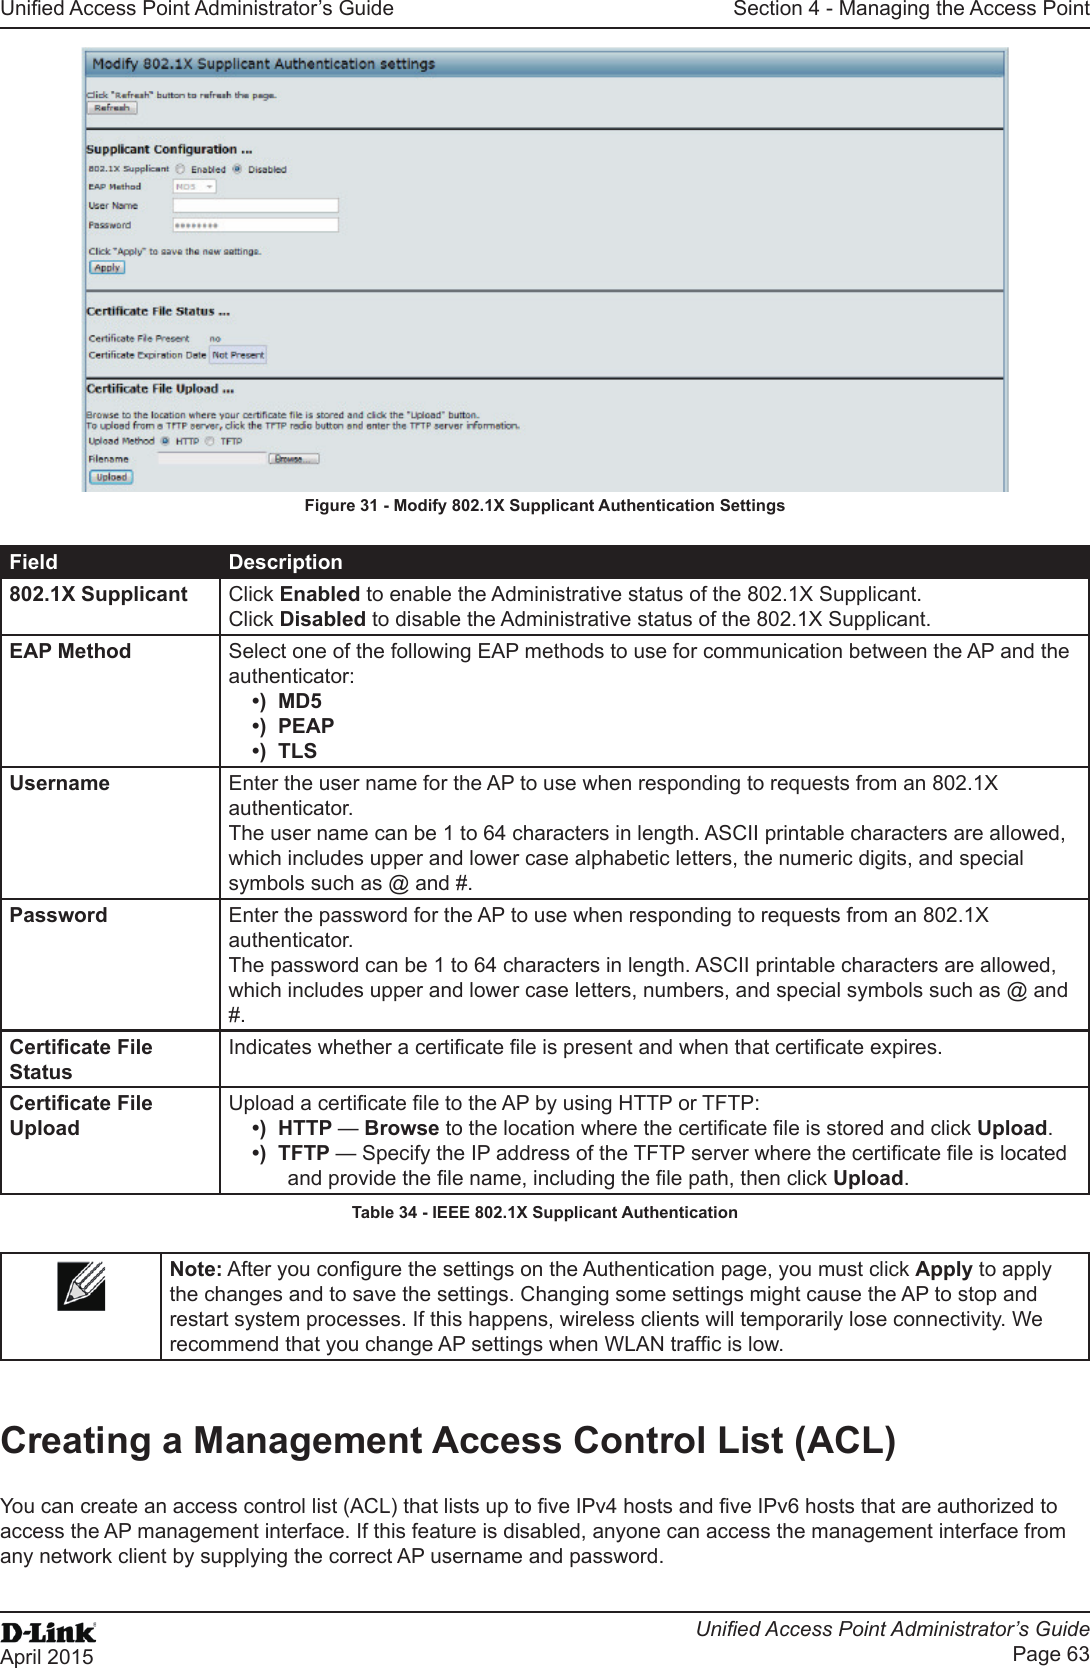 Unied Access Point Administrator’s GuideUnied Access Point Administrator’s GuidePage 63April 2015Section 4 - Managing the Access PointFigure 31 - Modify 802.1X Supplicant Authentication SettingsField Description802.1X Supplicant Click Enabled to enable the Administrative status of the 802.1X Supplicant.Click Disabled to disable the Administrative status of the 802.1X Supplicant.EAP Method Select one of the following EAP methods to use for communication between the AP and the authenticator:•)  MD5•)  PEAP•)  TLSUsername Enter the user name for the AP to use when responding to requests from an 802.1X authenticator. The user name can be 1 to 64 characters in length. ASCII printable characters are allowed, which includes upper and lower case alphabetic letters, the numeric digits, and special symbols such as @ and #.Password Enter the password for the AP to use when responding to requests from an 802.1X authenticator. The password can be 1 to 64 characters in length. ASCII printable characters are allowed, which includes upper and lower case letters, numbers, and special symbols such as @ and #.Certicate File StatusIndicates whether a certicate le is present and when that certicate expires.Certicate File UploadUpload a certicate le to the AP by using HTTP or TFTP:•)  HTTP — Browse to the location where the certicate le is stored and click Upload. •)  TFTP — Specify the IP address of the TFTP server where the certicate le is located and provide the le name, including the le path, then click Upload.Table 34 - IEEE 802.1X Supplicant AuthenticationNote: After you congure the settings on the Authentication page, you must click Apply to apply the changes and to save the settings. Changing some settings might cause the AP to stop and restart system processes. If this happens, wireless clients will temporarily lose connectivity. We recommend that you change AP settings when WLAN trafc is low.Creating a Management Access Control List (ACL)You can create an access control list (ACL) that lists up to ve IPv4 hosts and ve IPv6 hosts that are authorized to access the AP management interface. If this feature is disabled, anyone can access the management interface from any network client by supplying the correct AP username and password.